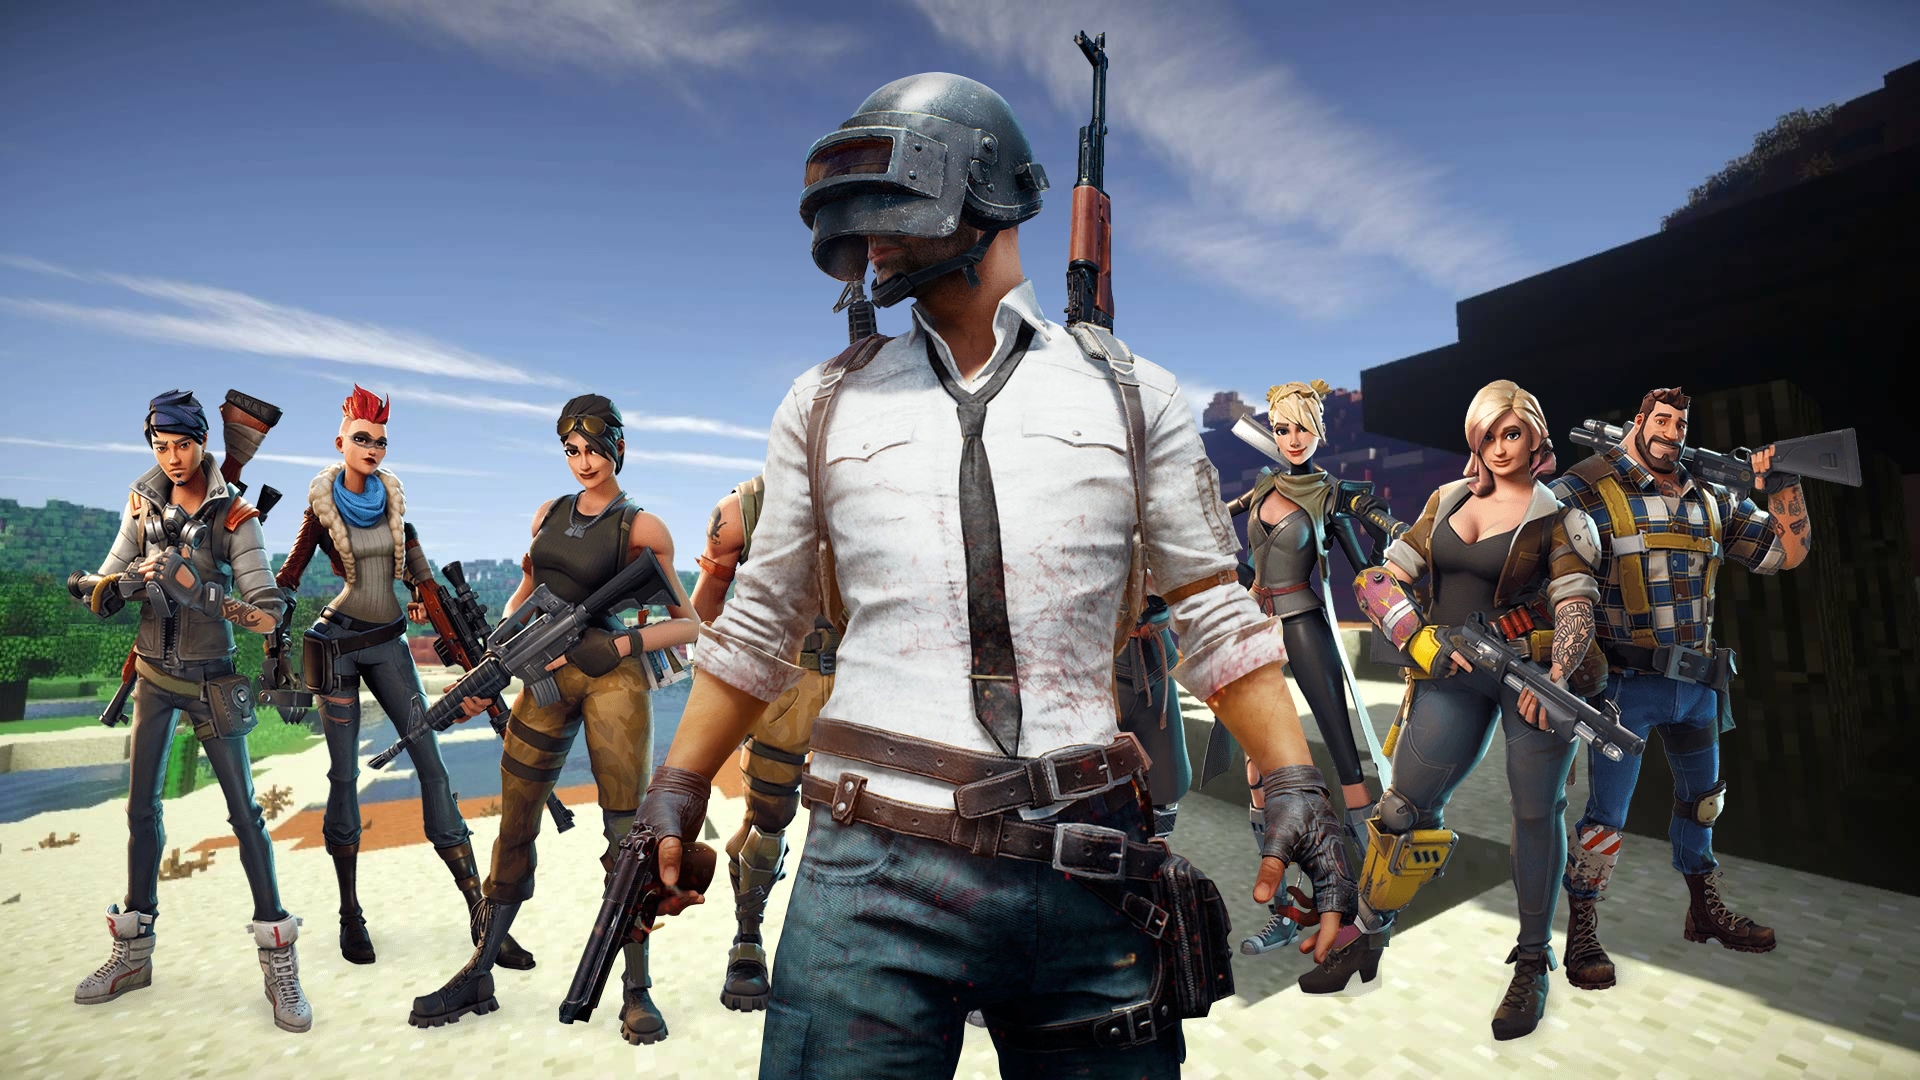 Most Popular Battle Royale Games On Mobile Devices